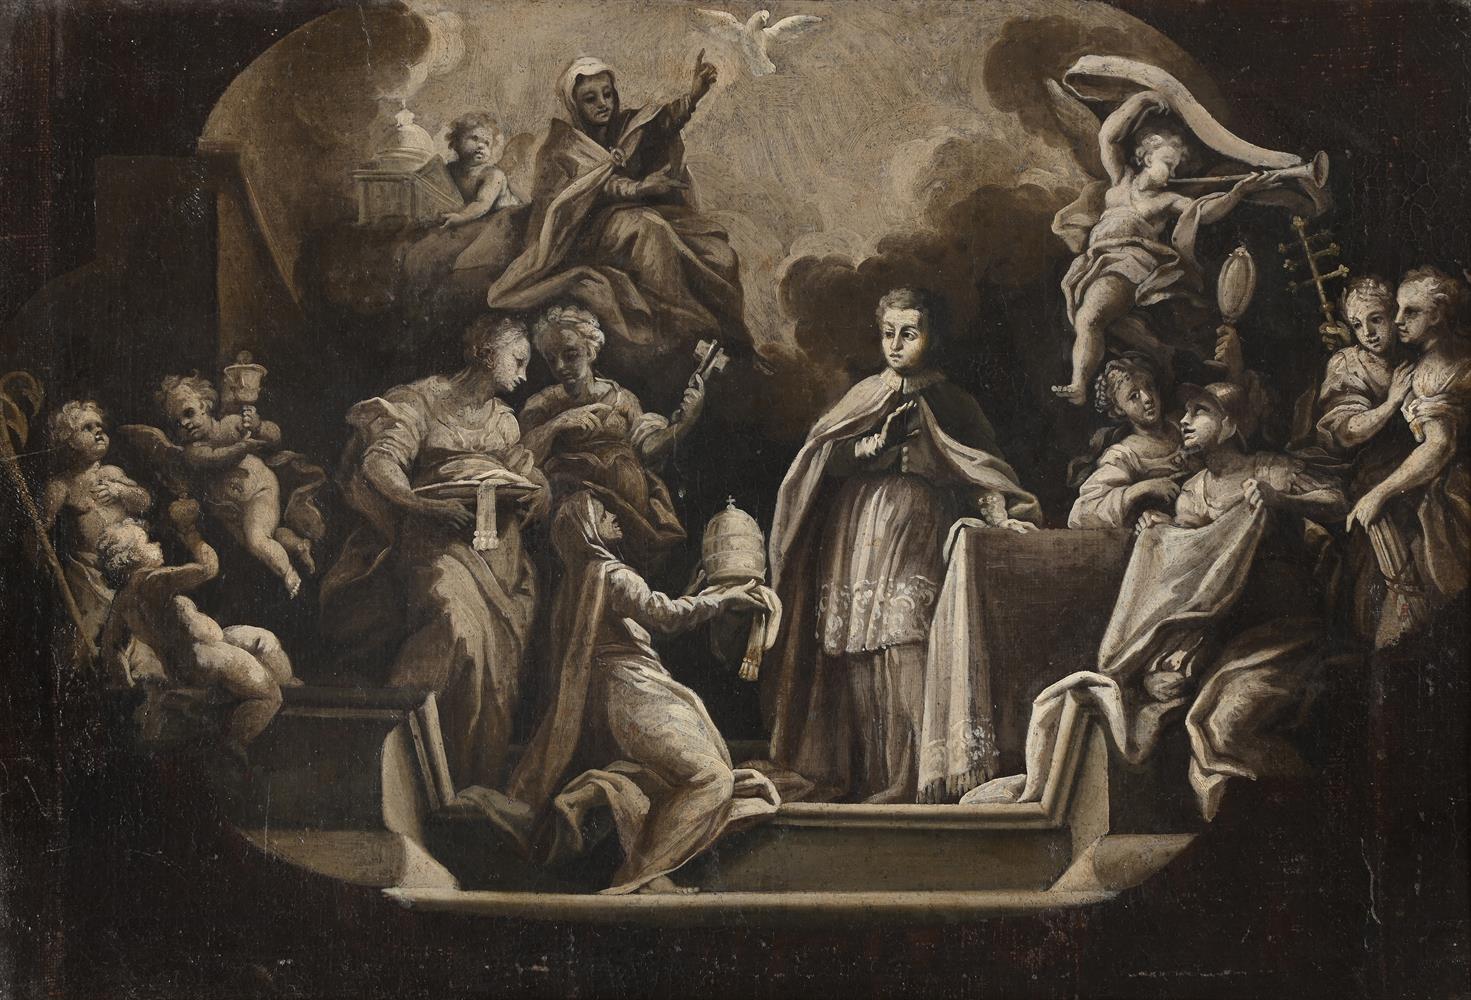 ITALIAN SCHOOL (18TH CENTURY), THE ANNOINTING OF A NEW POPE WITH ALLEGORICAL FIGURES